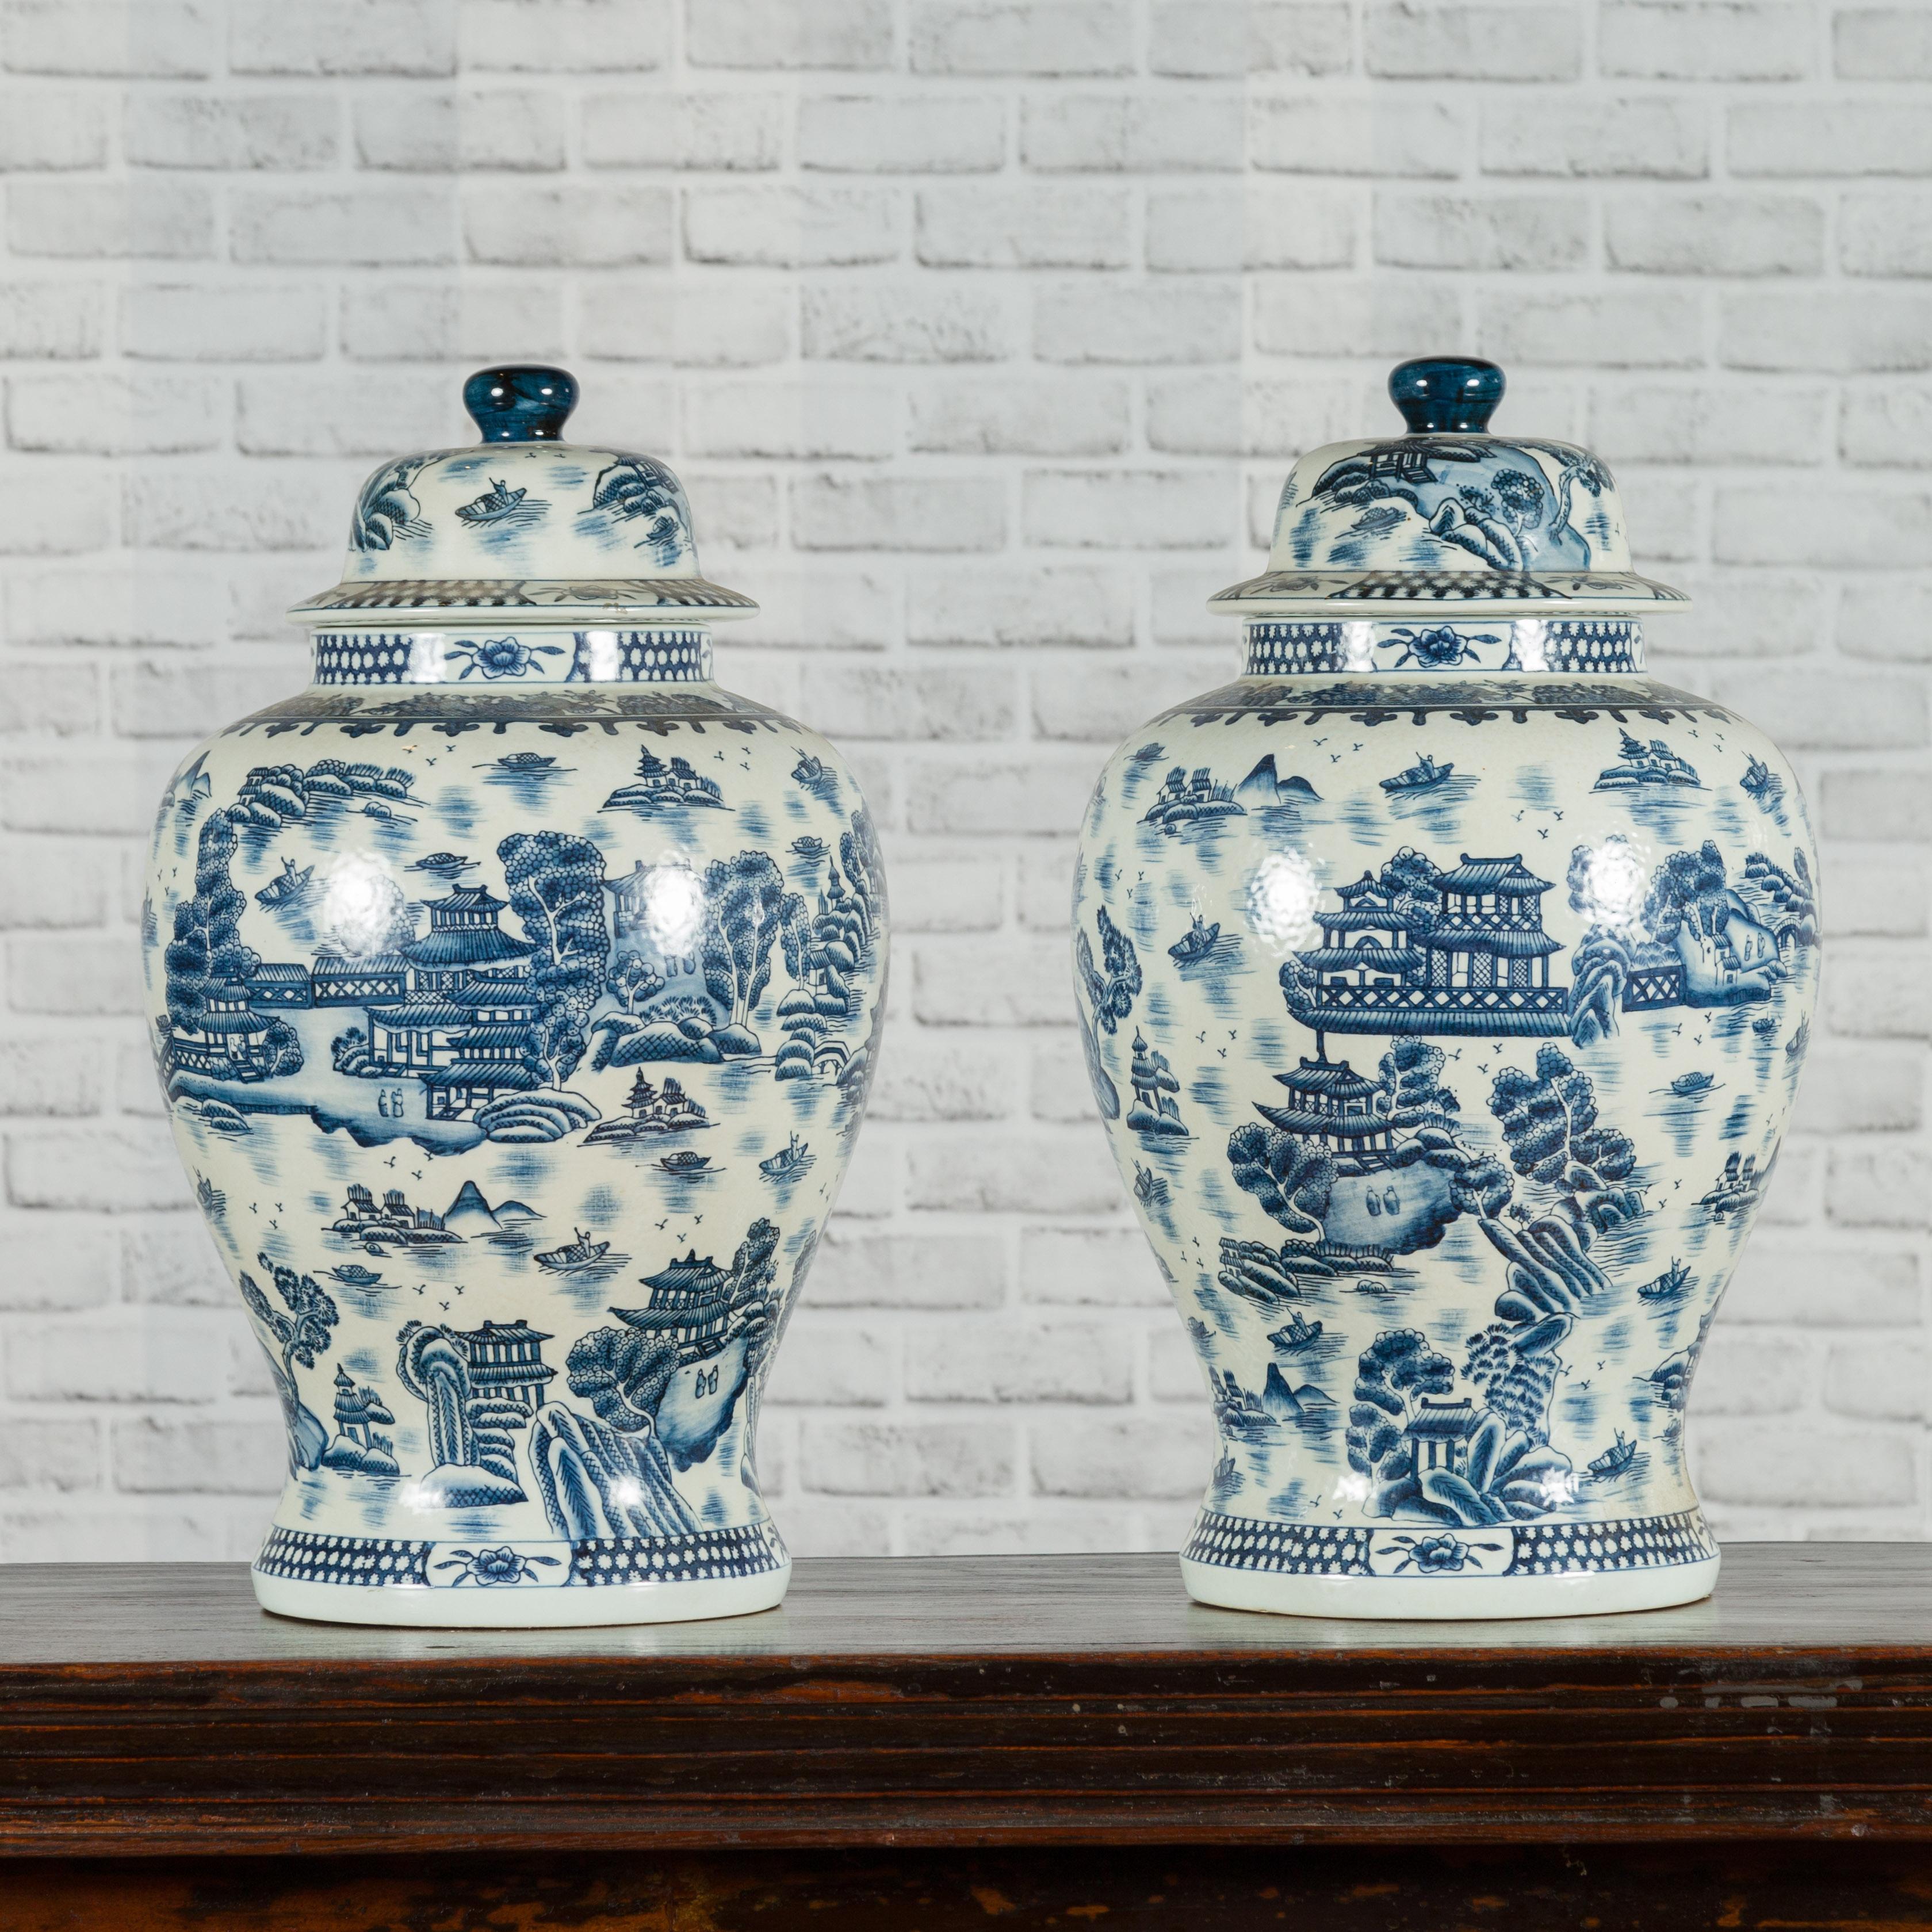 A pair of Chinese vintage blue and white porcelain lidded temple jars from the mid-20th century with landscape and architecture patterns. Created in China during the midcentury period, each of this pair of blue and white porcelain temple jars